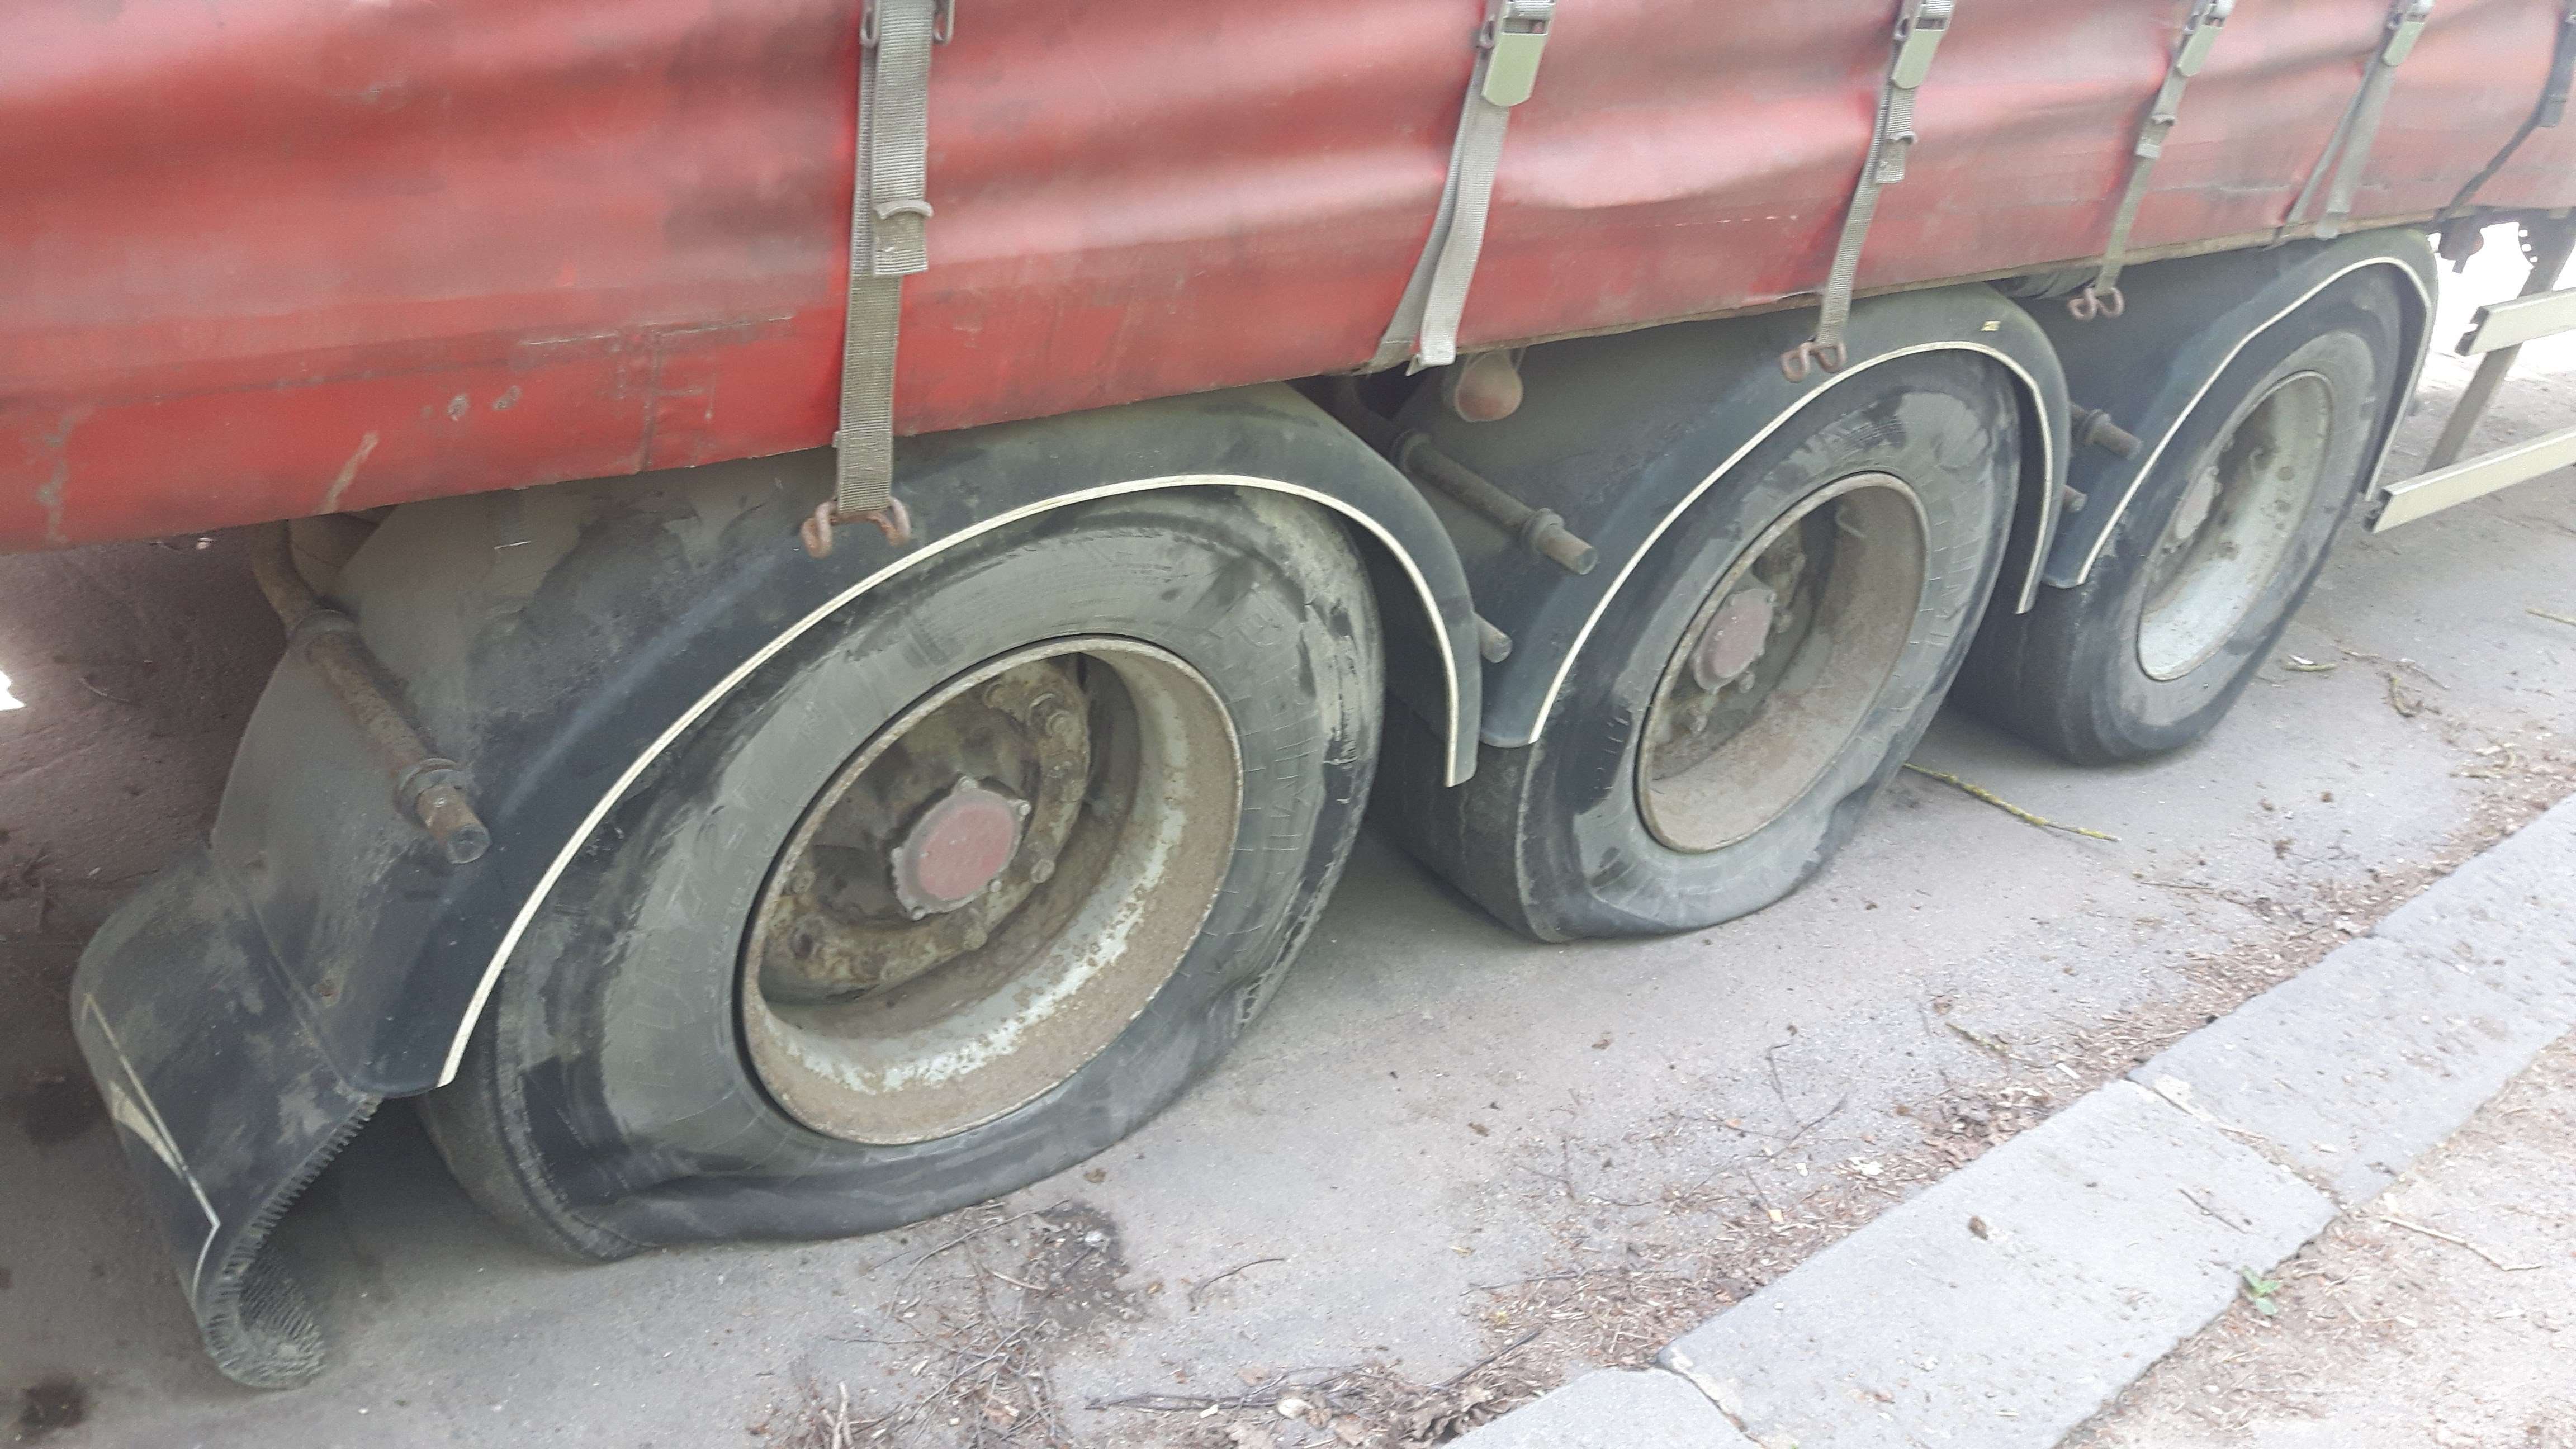 Flat tyres on a trailer near the Hare and Hounds pub on the A20